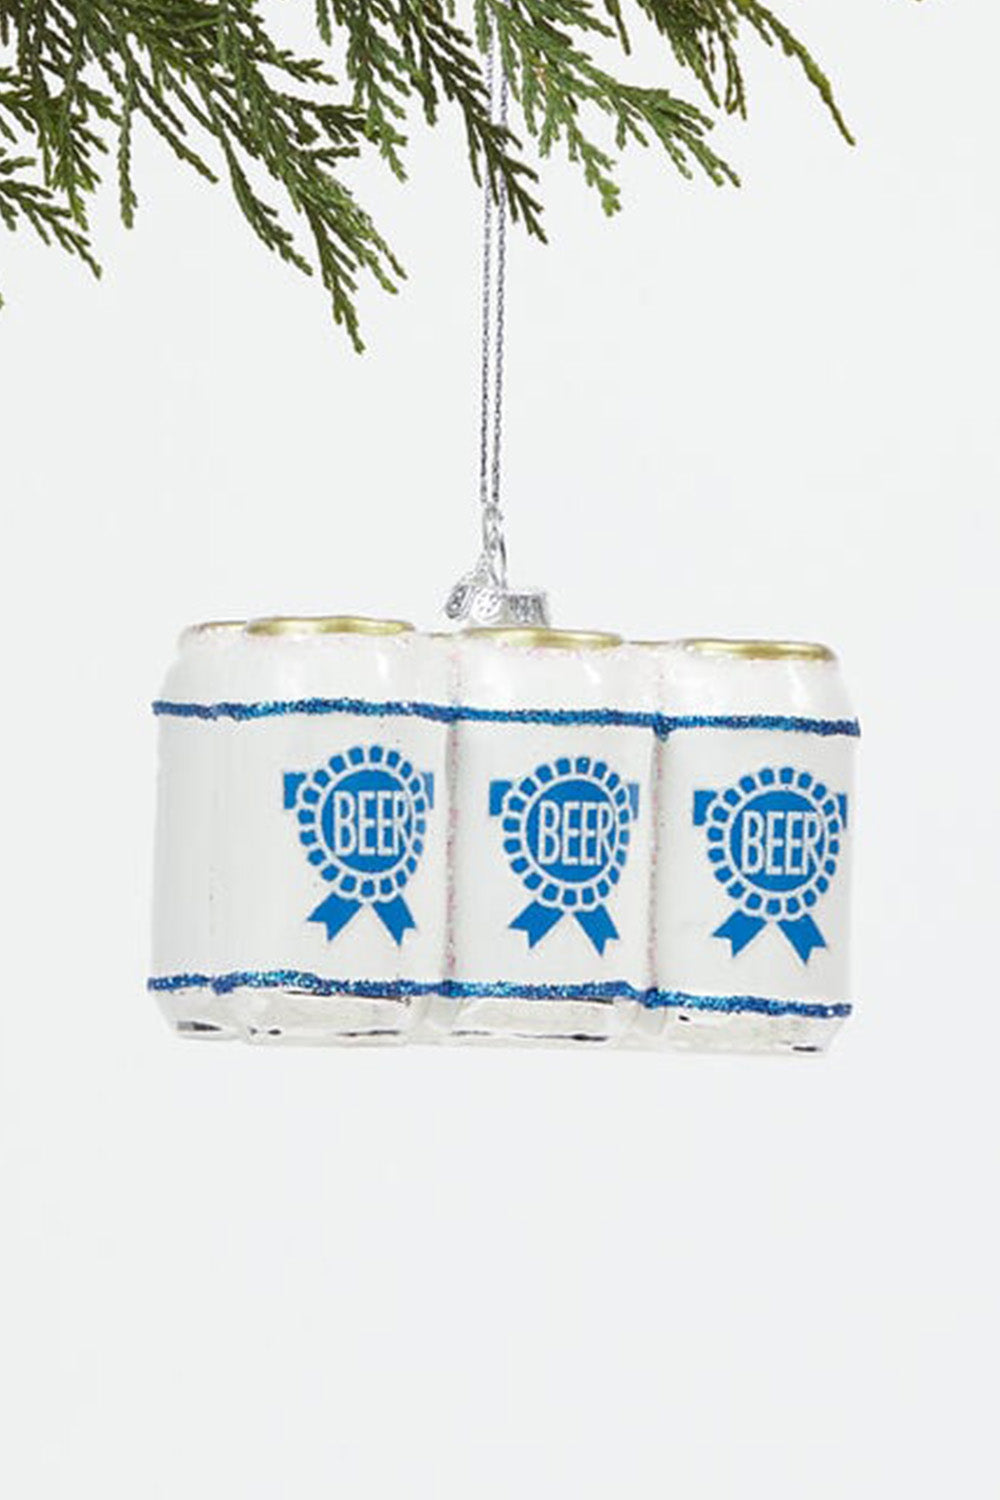 Six Pack Beer Christmas Ornament